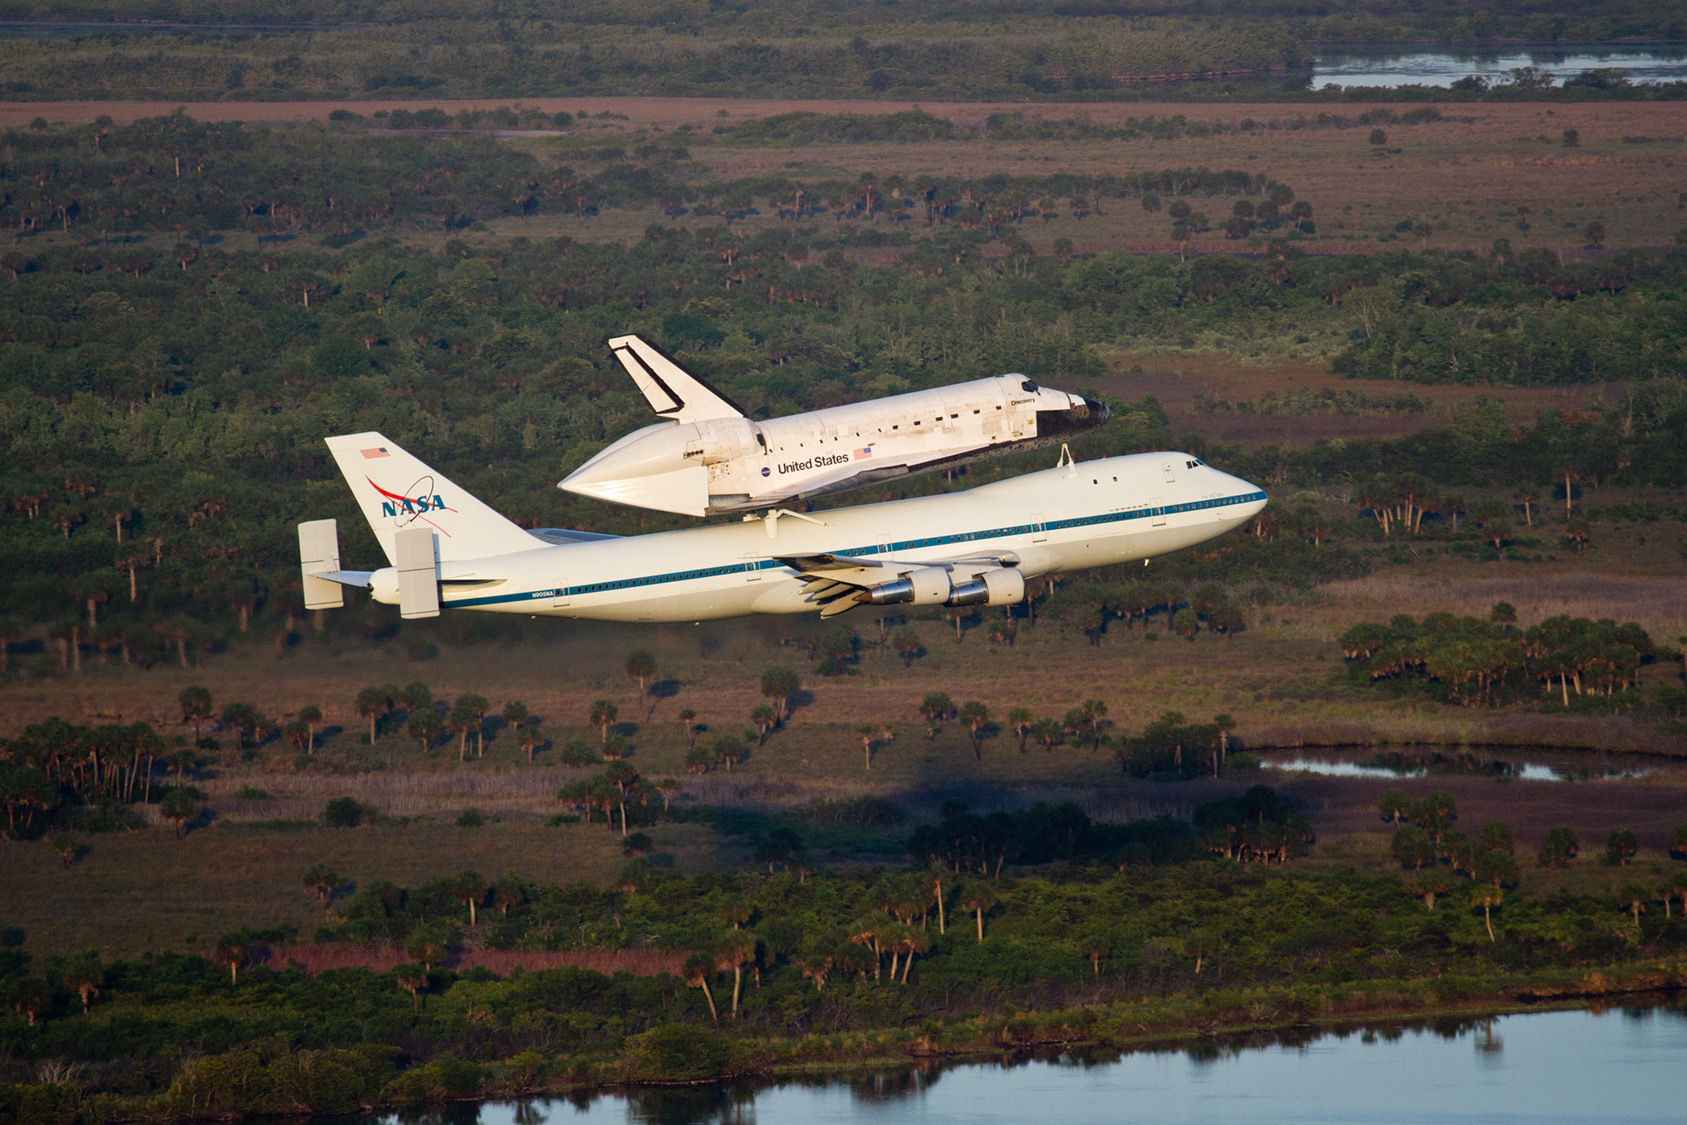 Retired NASA space shuttle being transported to museum via airplane